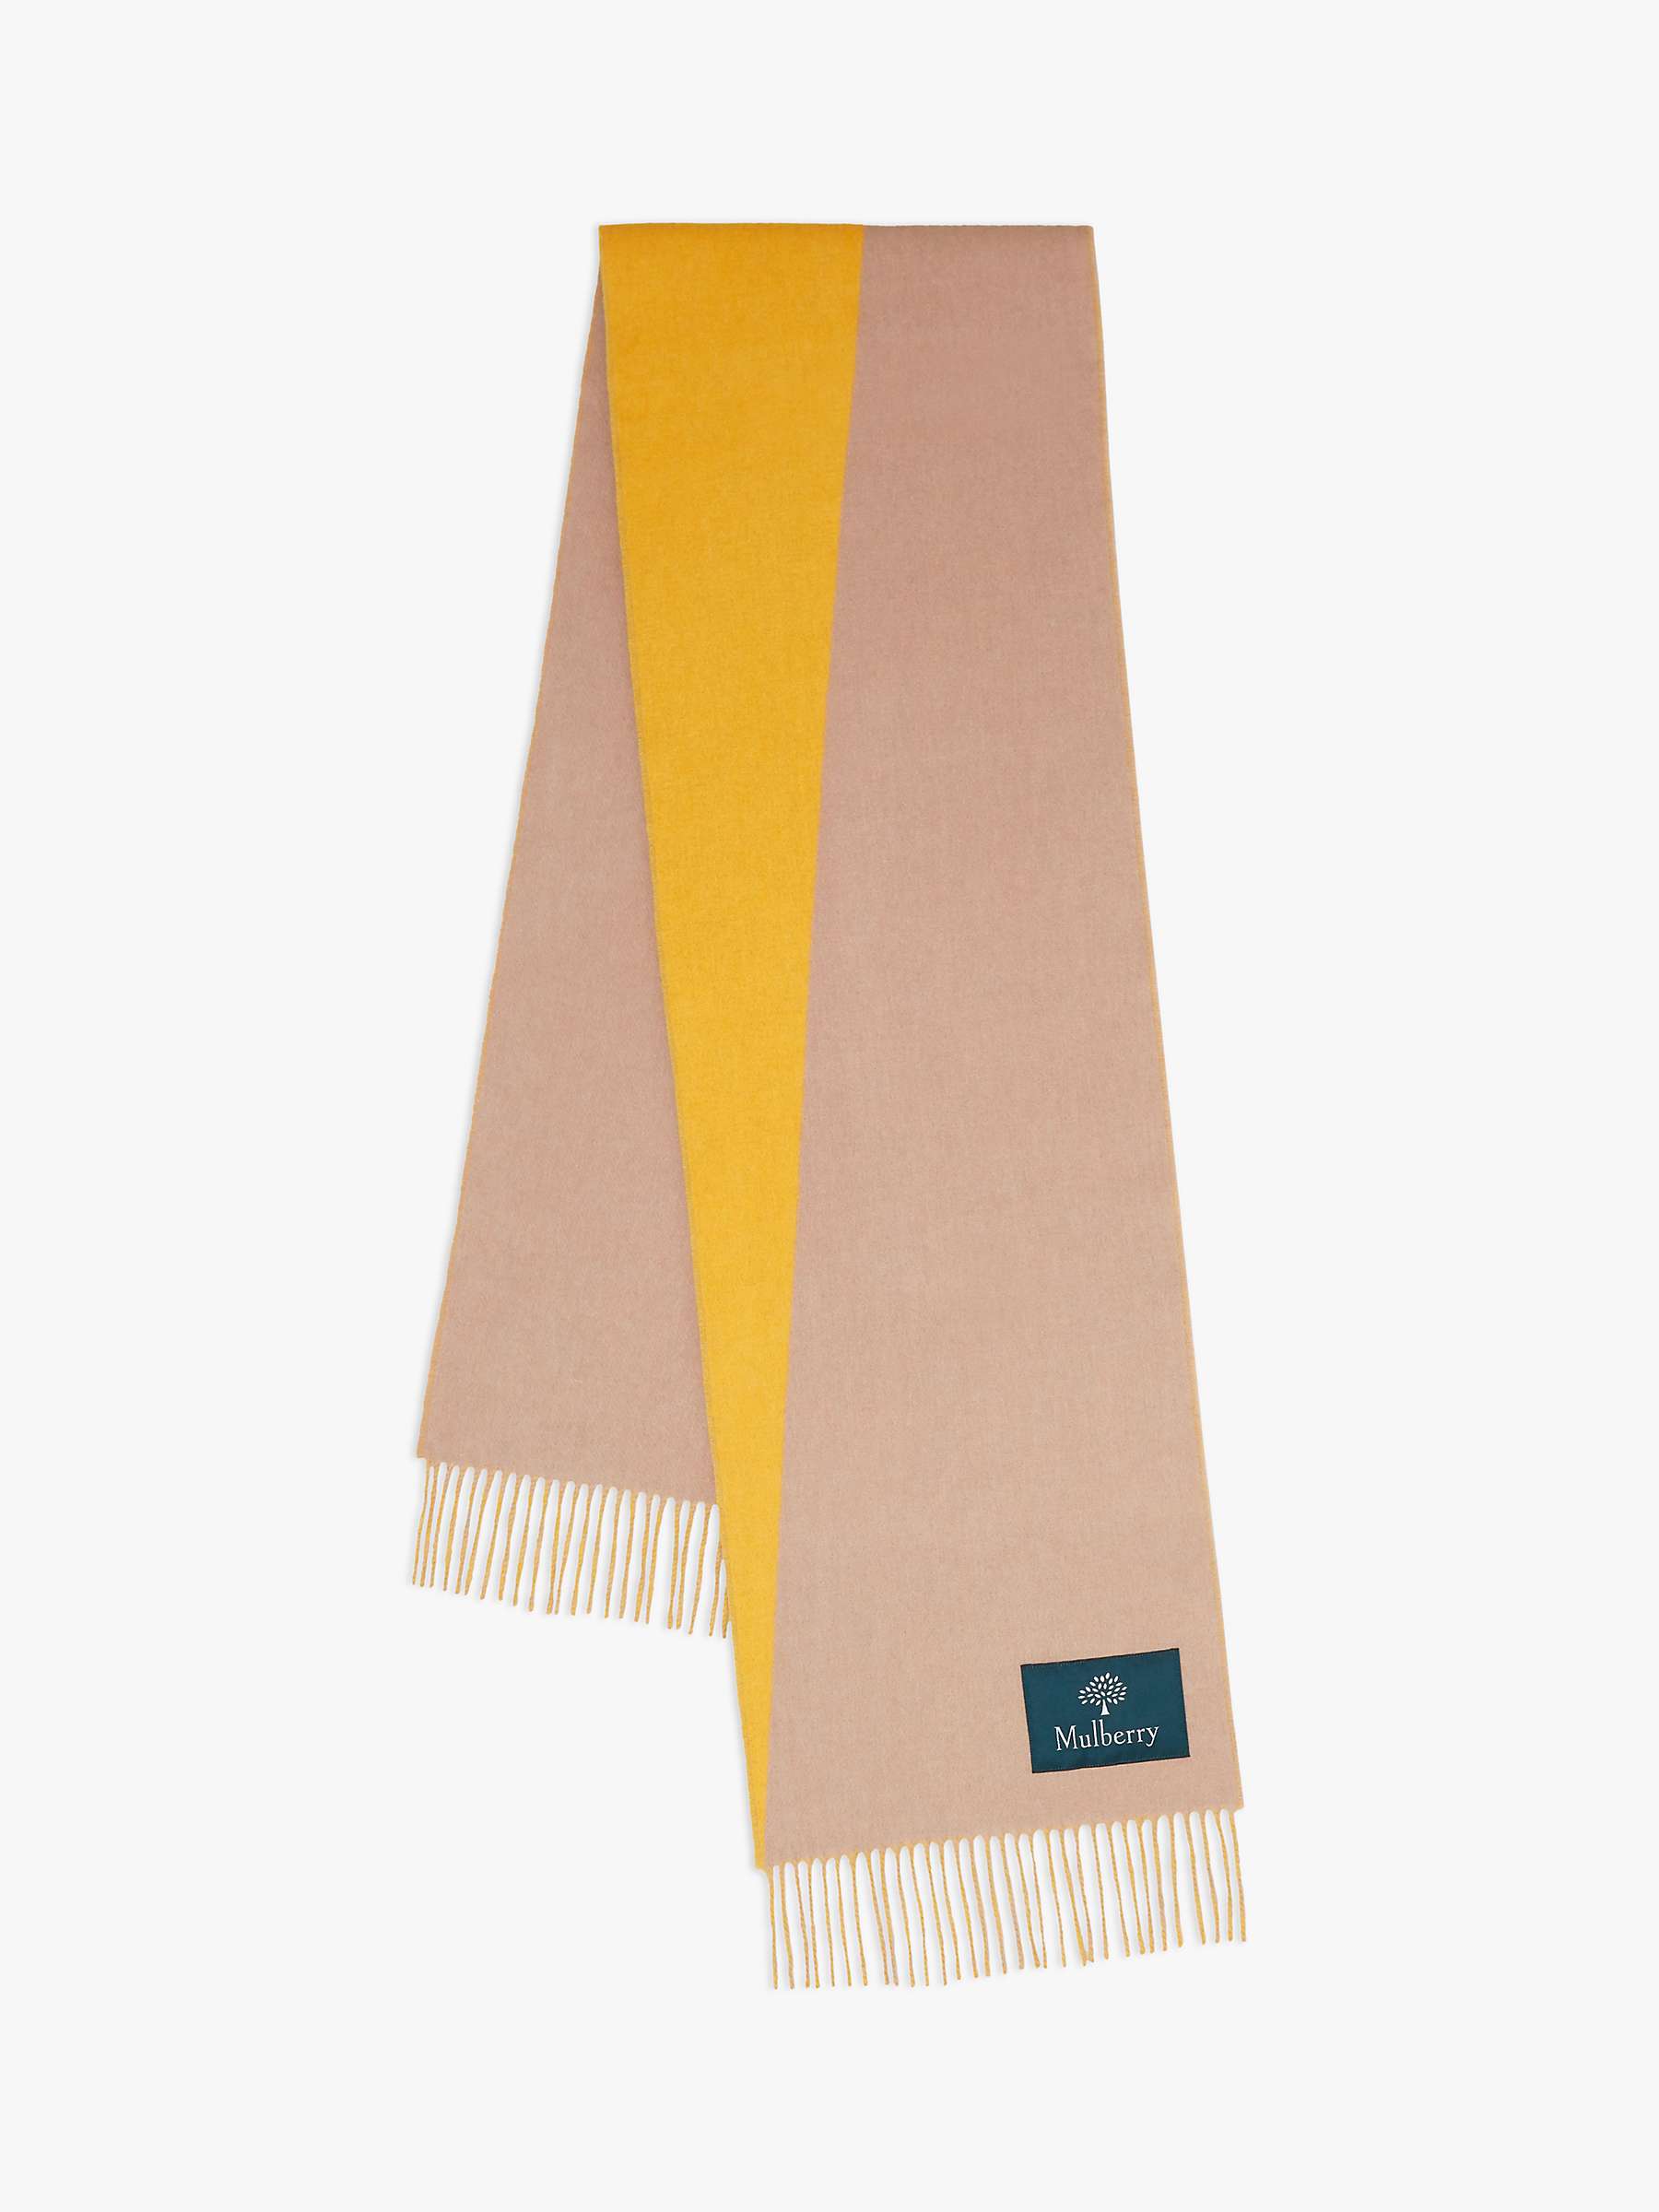 Buy Mulberry Wool Cashmere Two Tone Scarf, Double Yellow/Maple Online at johnlewis.com